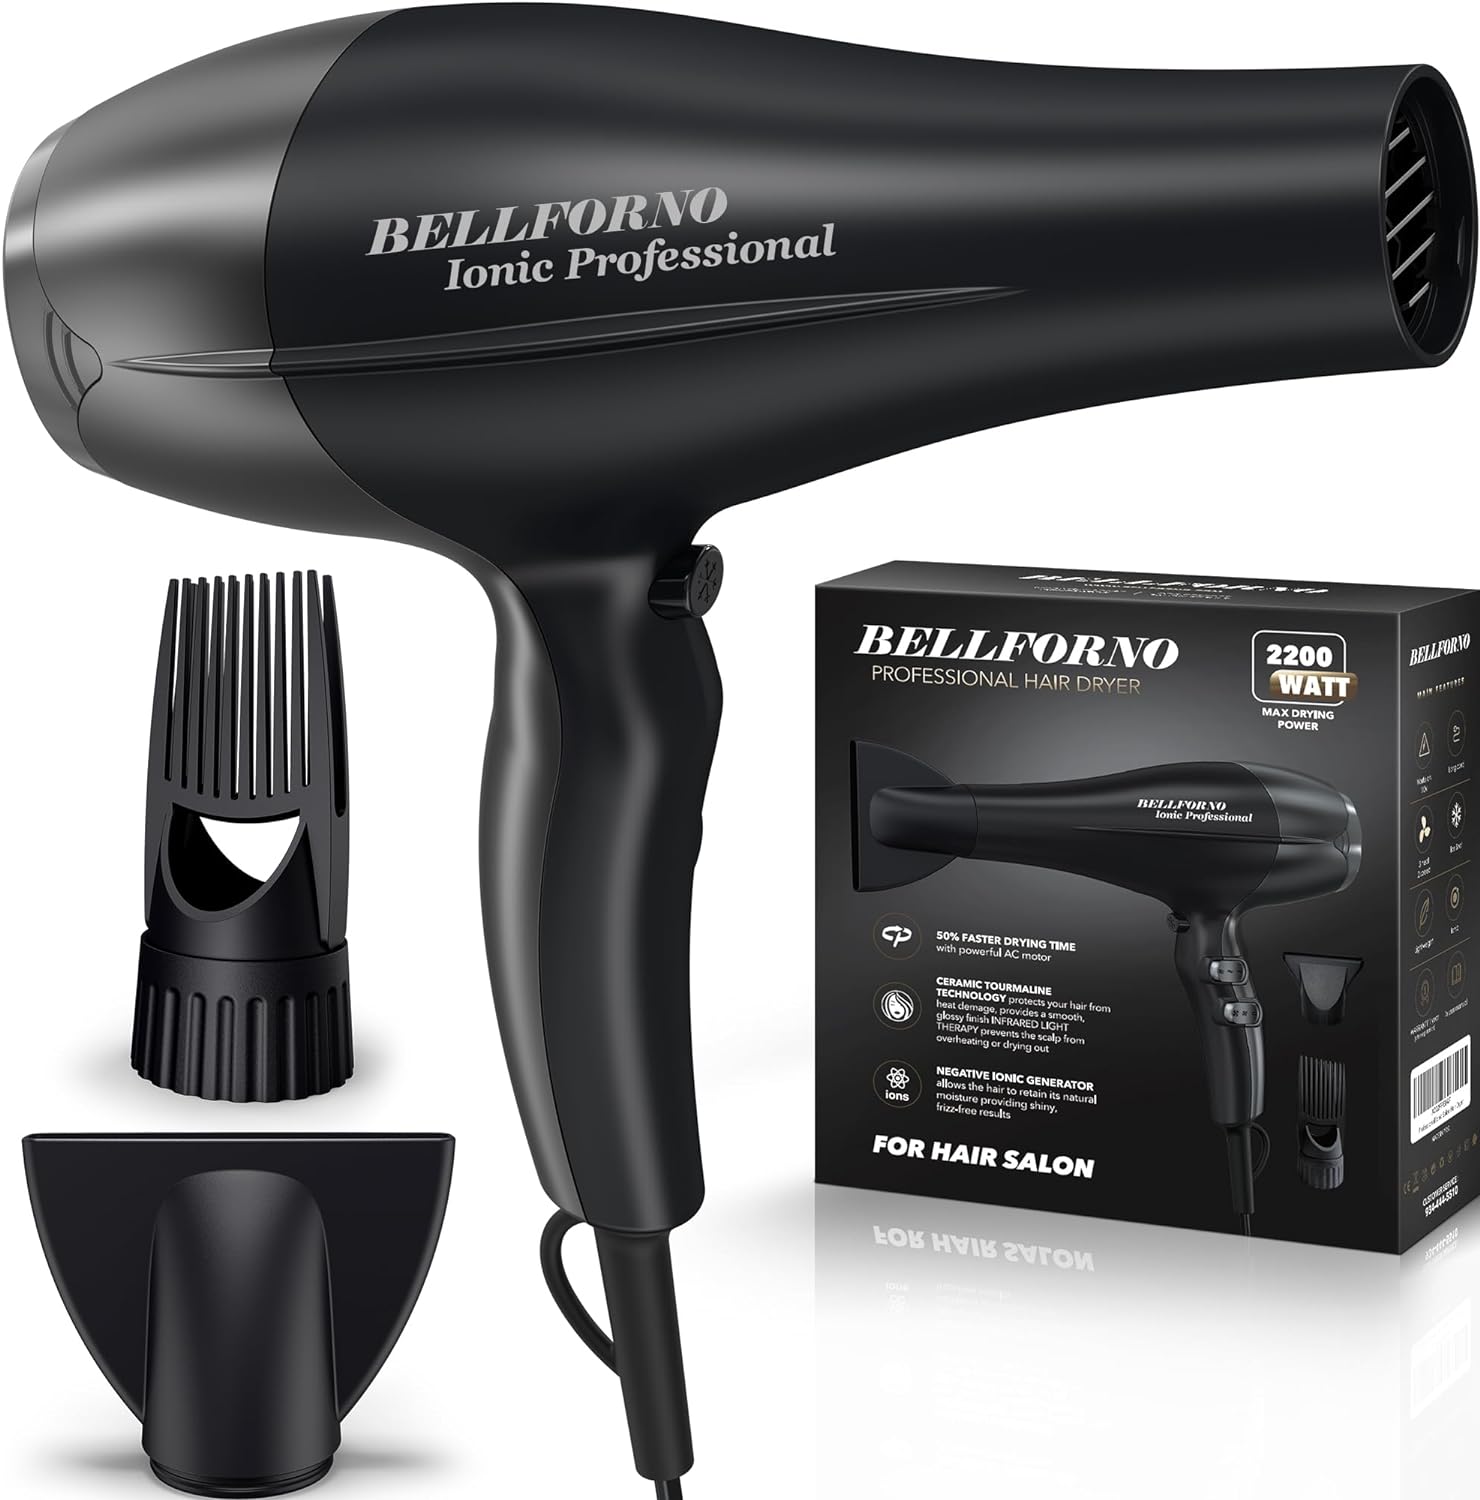 Fast-Dry 2200W Negative Ionic Ceramic Hair Dryer Tourmaline Technology - Lightweight & Quiet Professional Salon Blow Dryer with ADC Motor - hairdryer